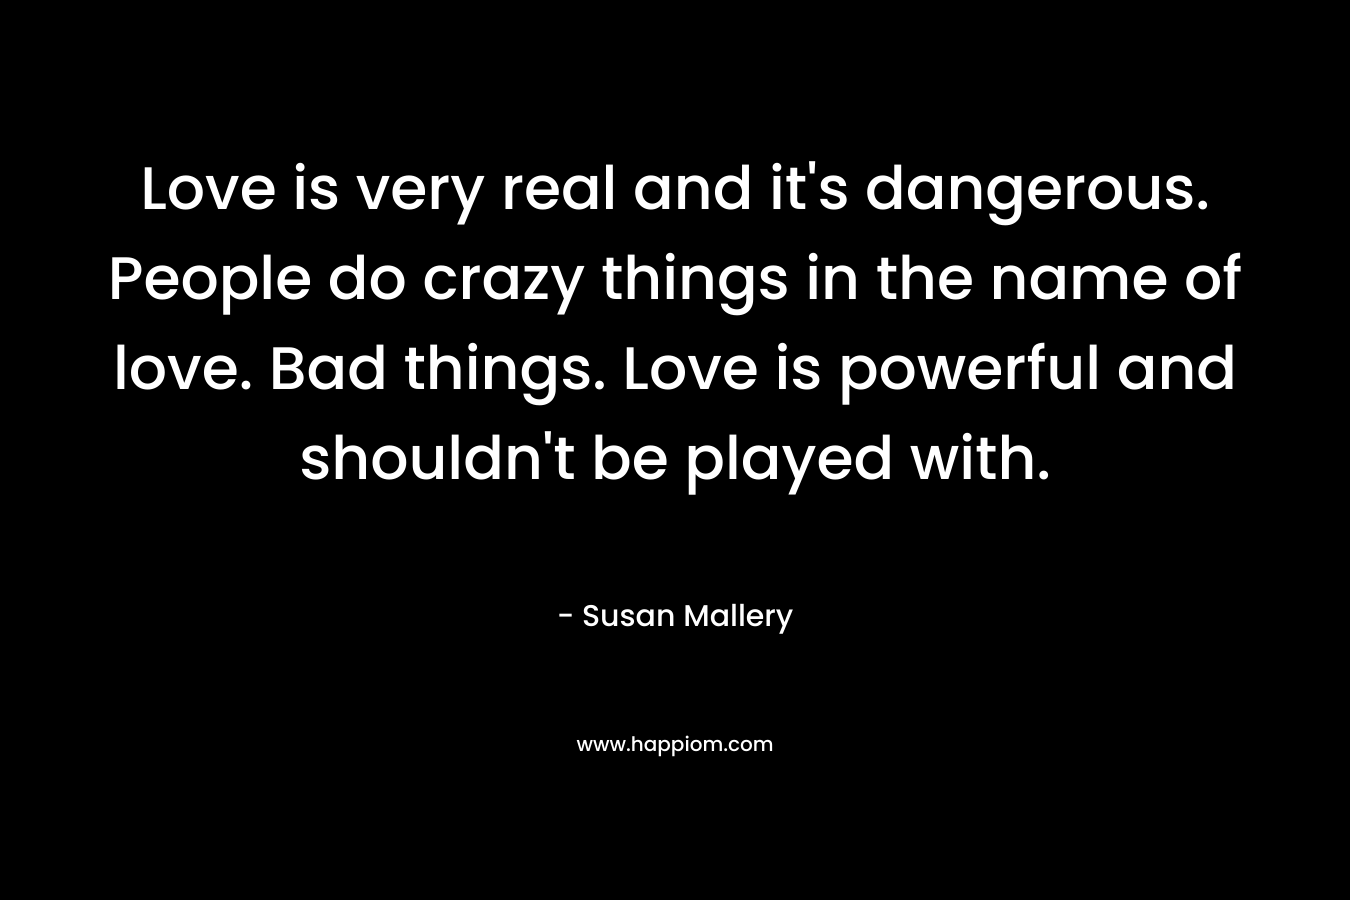 Love is very real and it’s dangerous. People do crazy things in the name of love. Bad things. Love is powerful and shouldn’t be played with. – Susan Mallery